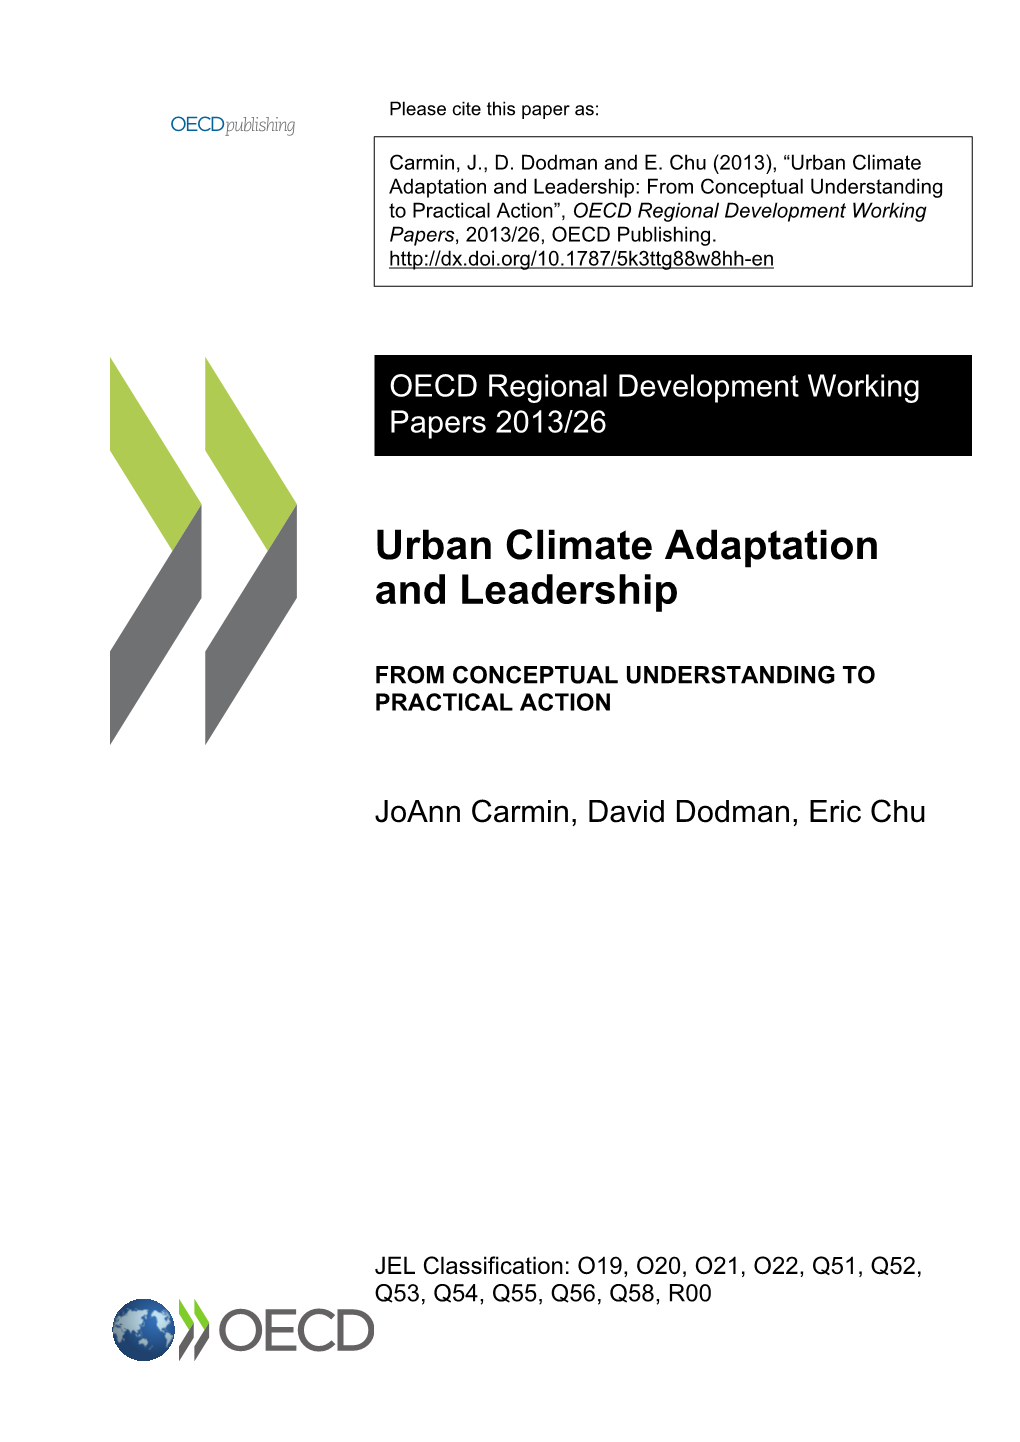 Urban Climate Adaptation and Leadership: from Conceptual Understanding to Practical Action”, OECD Regional Development Working Papers, 2013/26, OECD Publishing